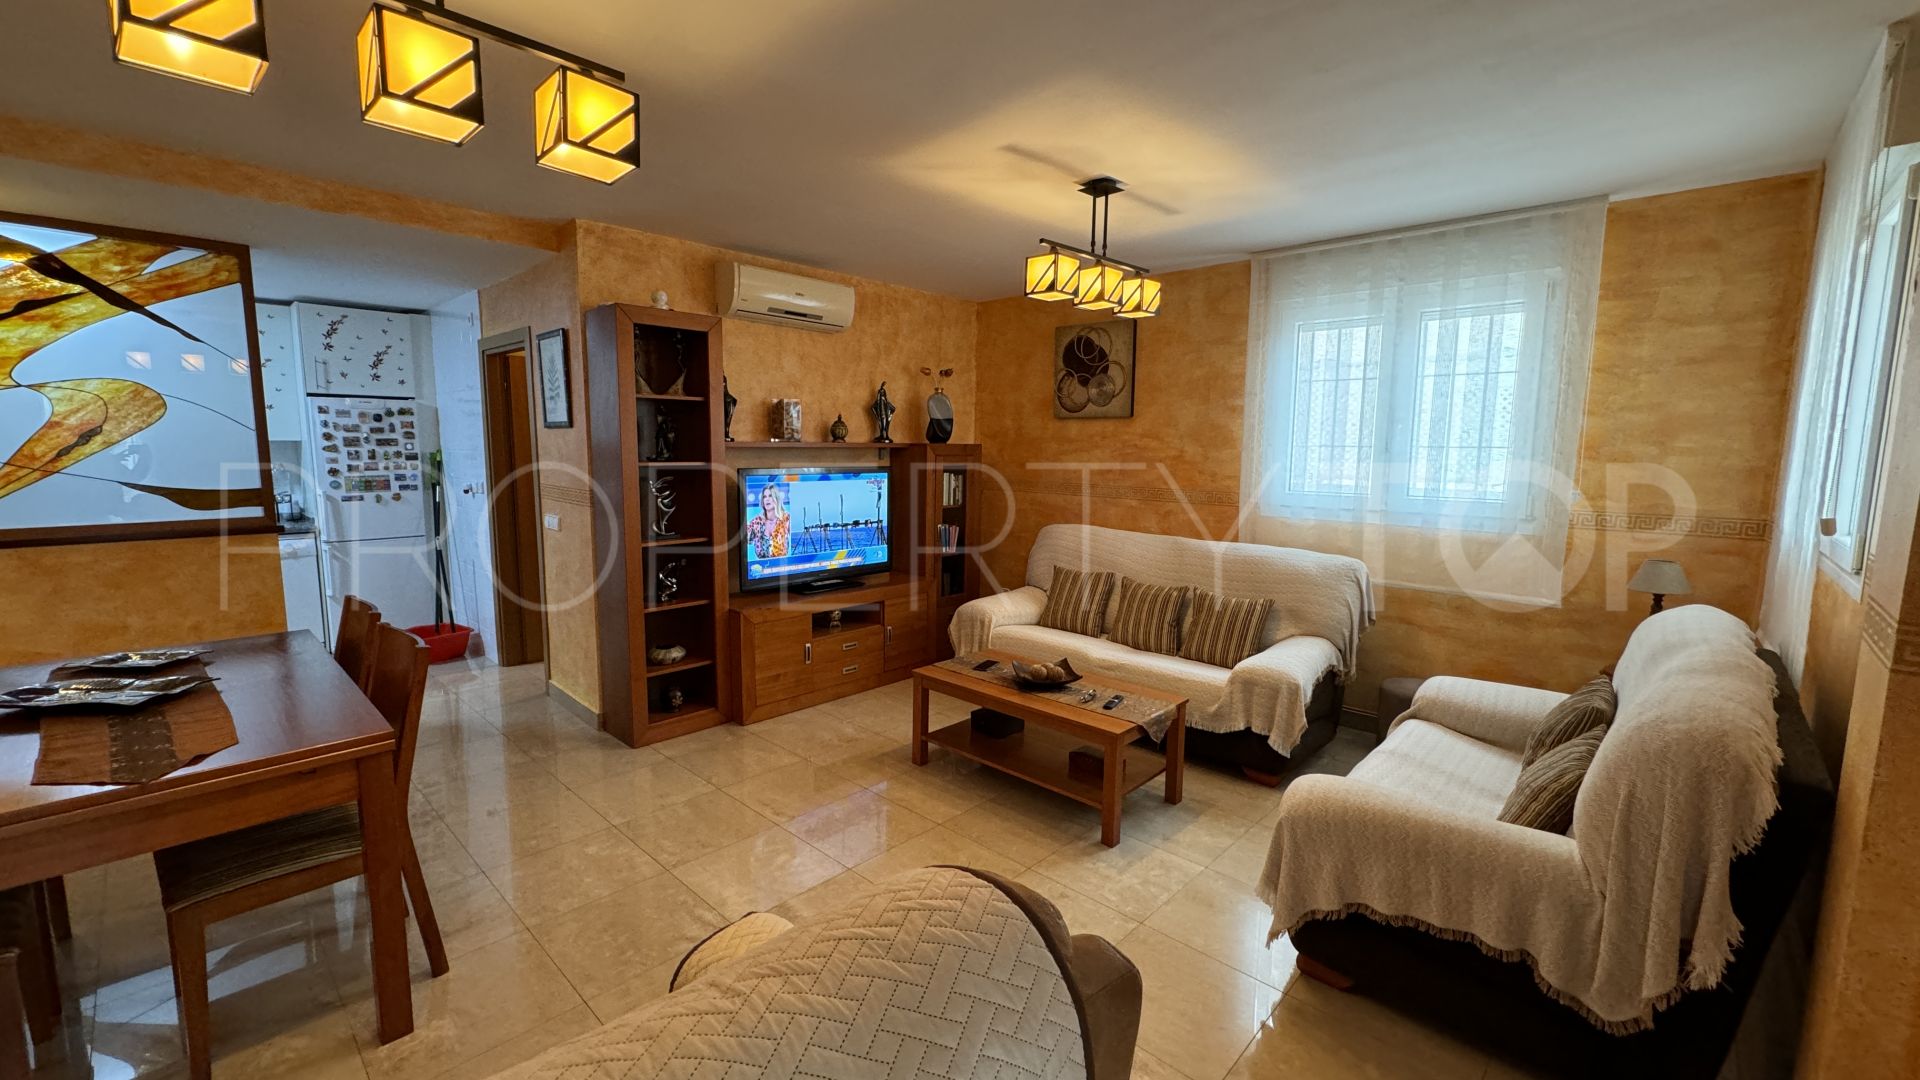 For sale Chullera 2 bedrooms ground floor apartment